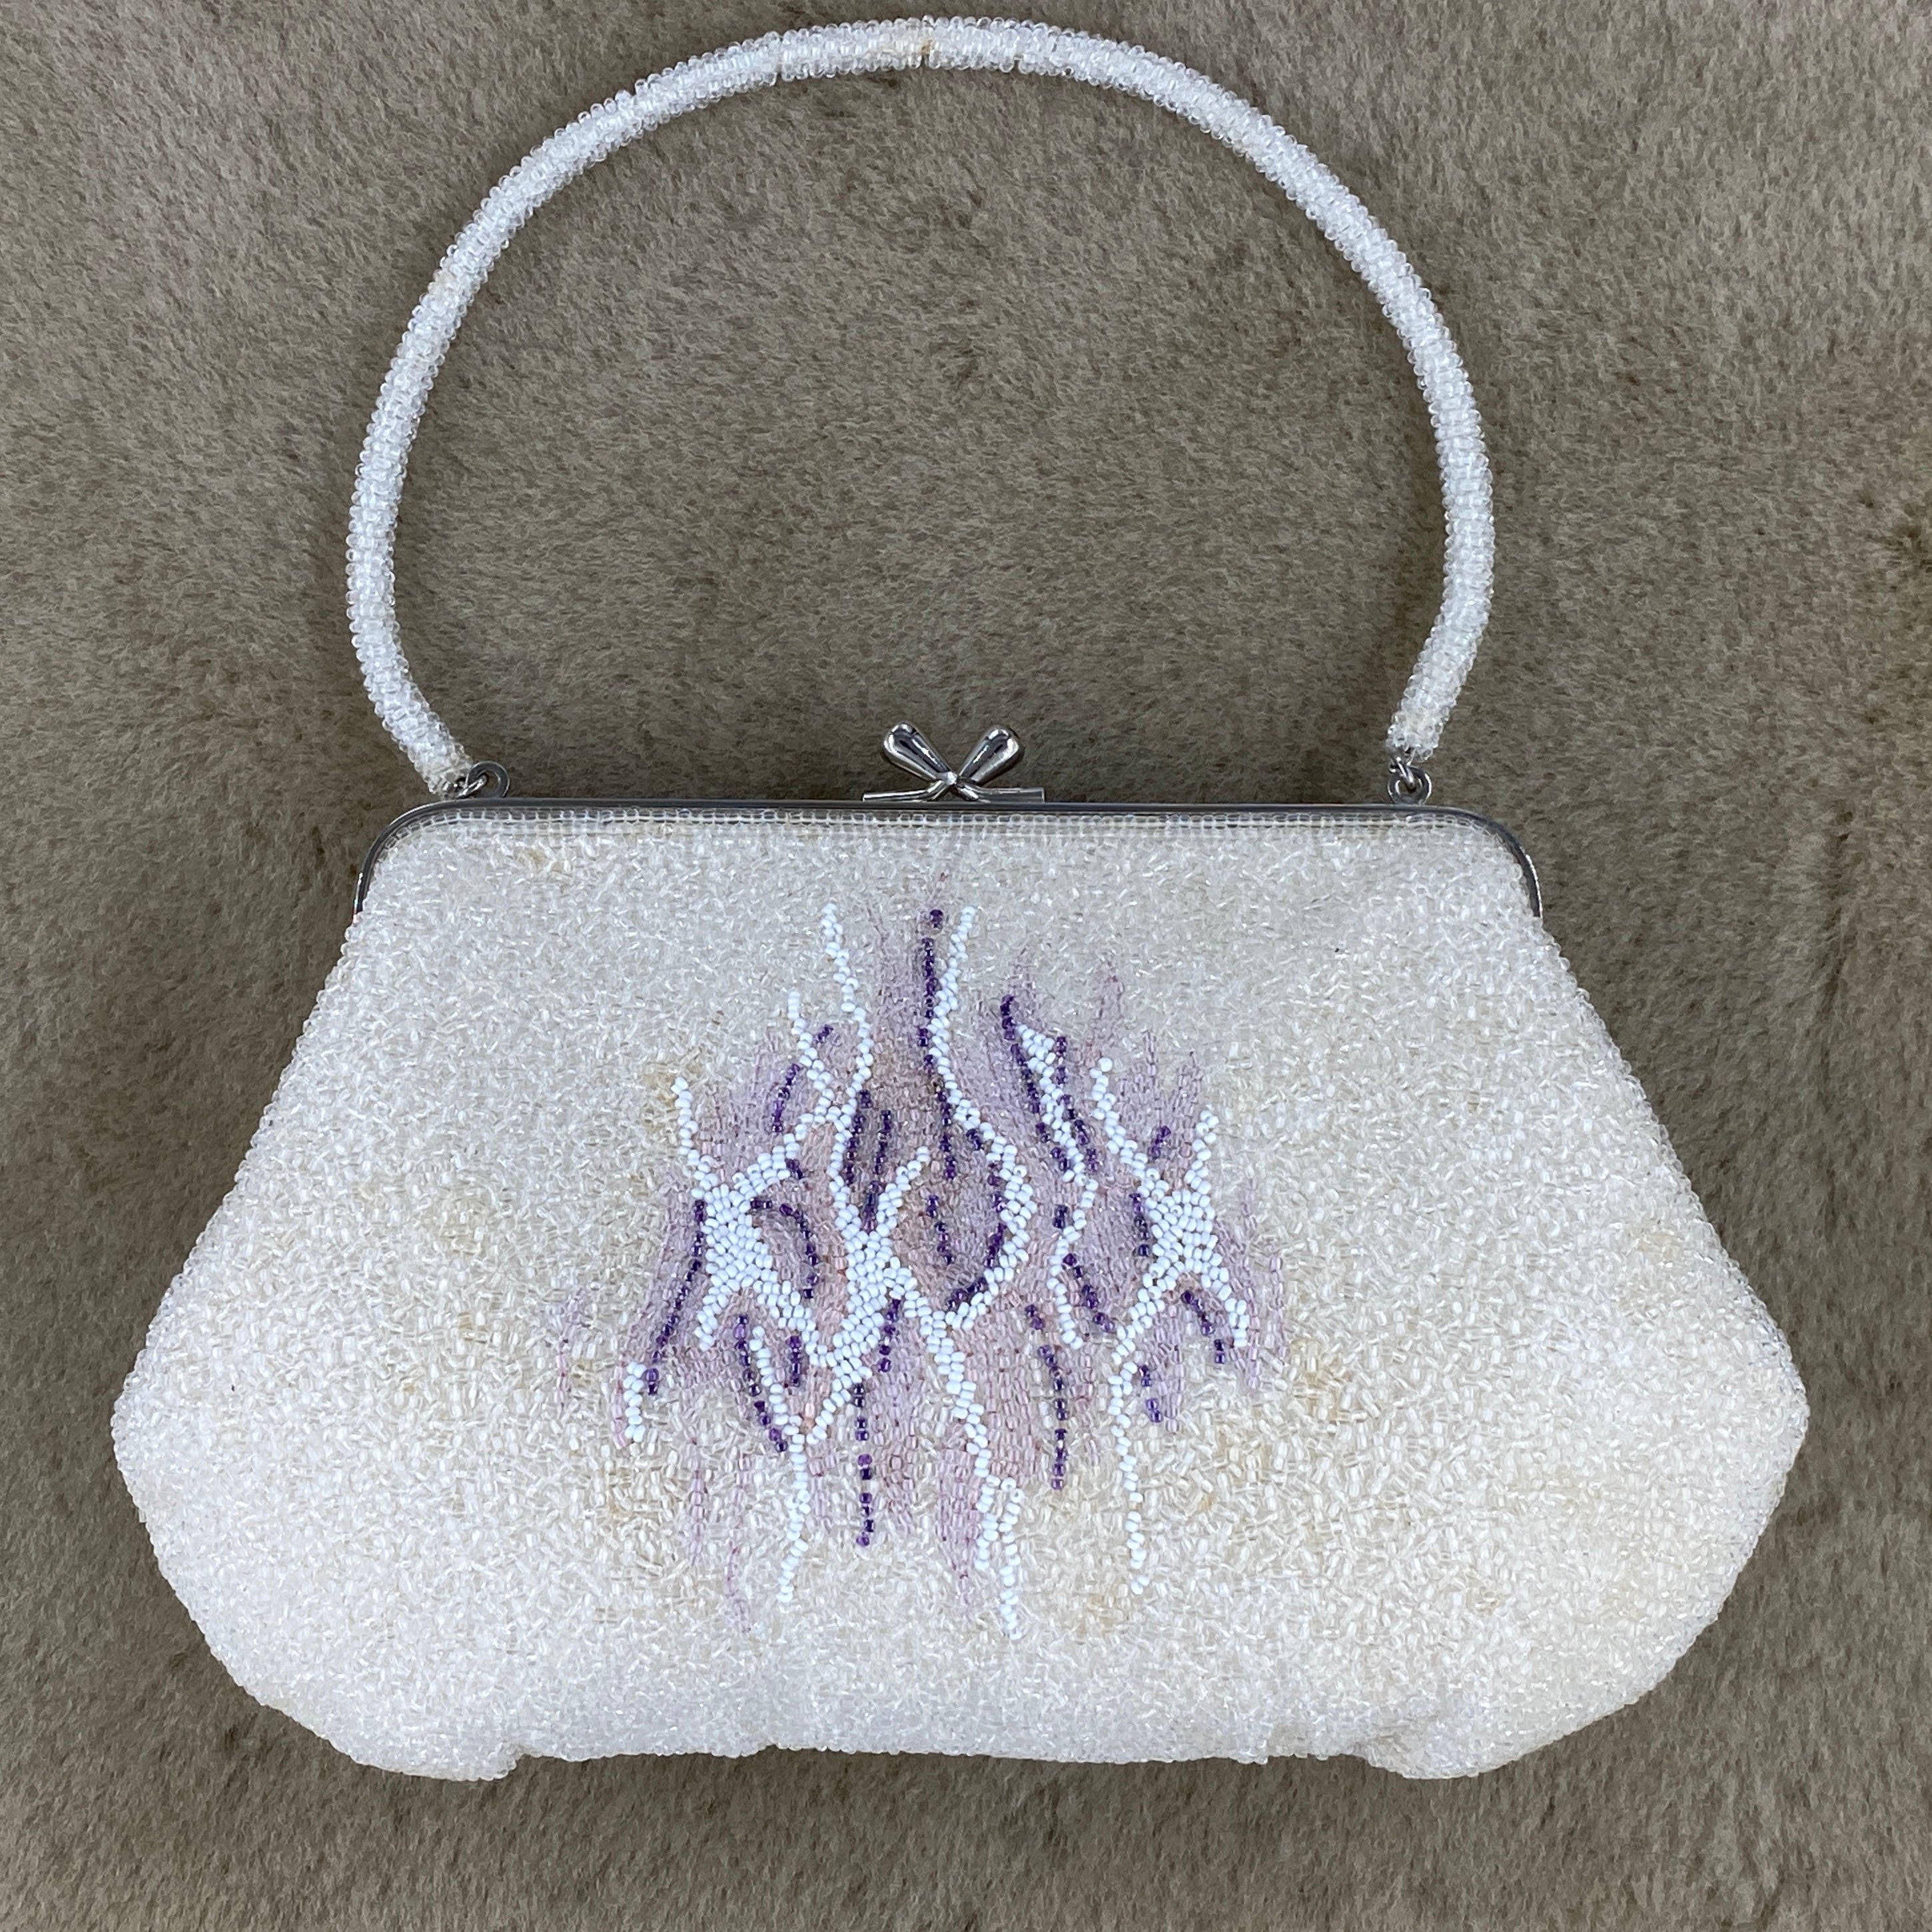 Beaded Purse From Japan With White & Purple Abstract Motif (Vintage  1950's-1960's) Fits Most Cell Phones